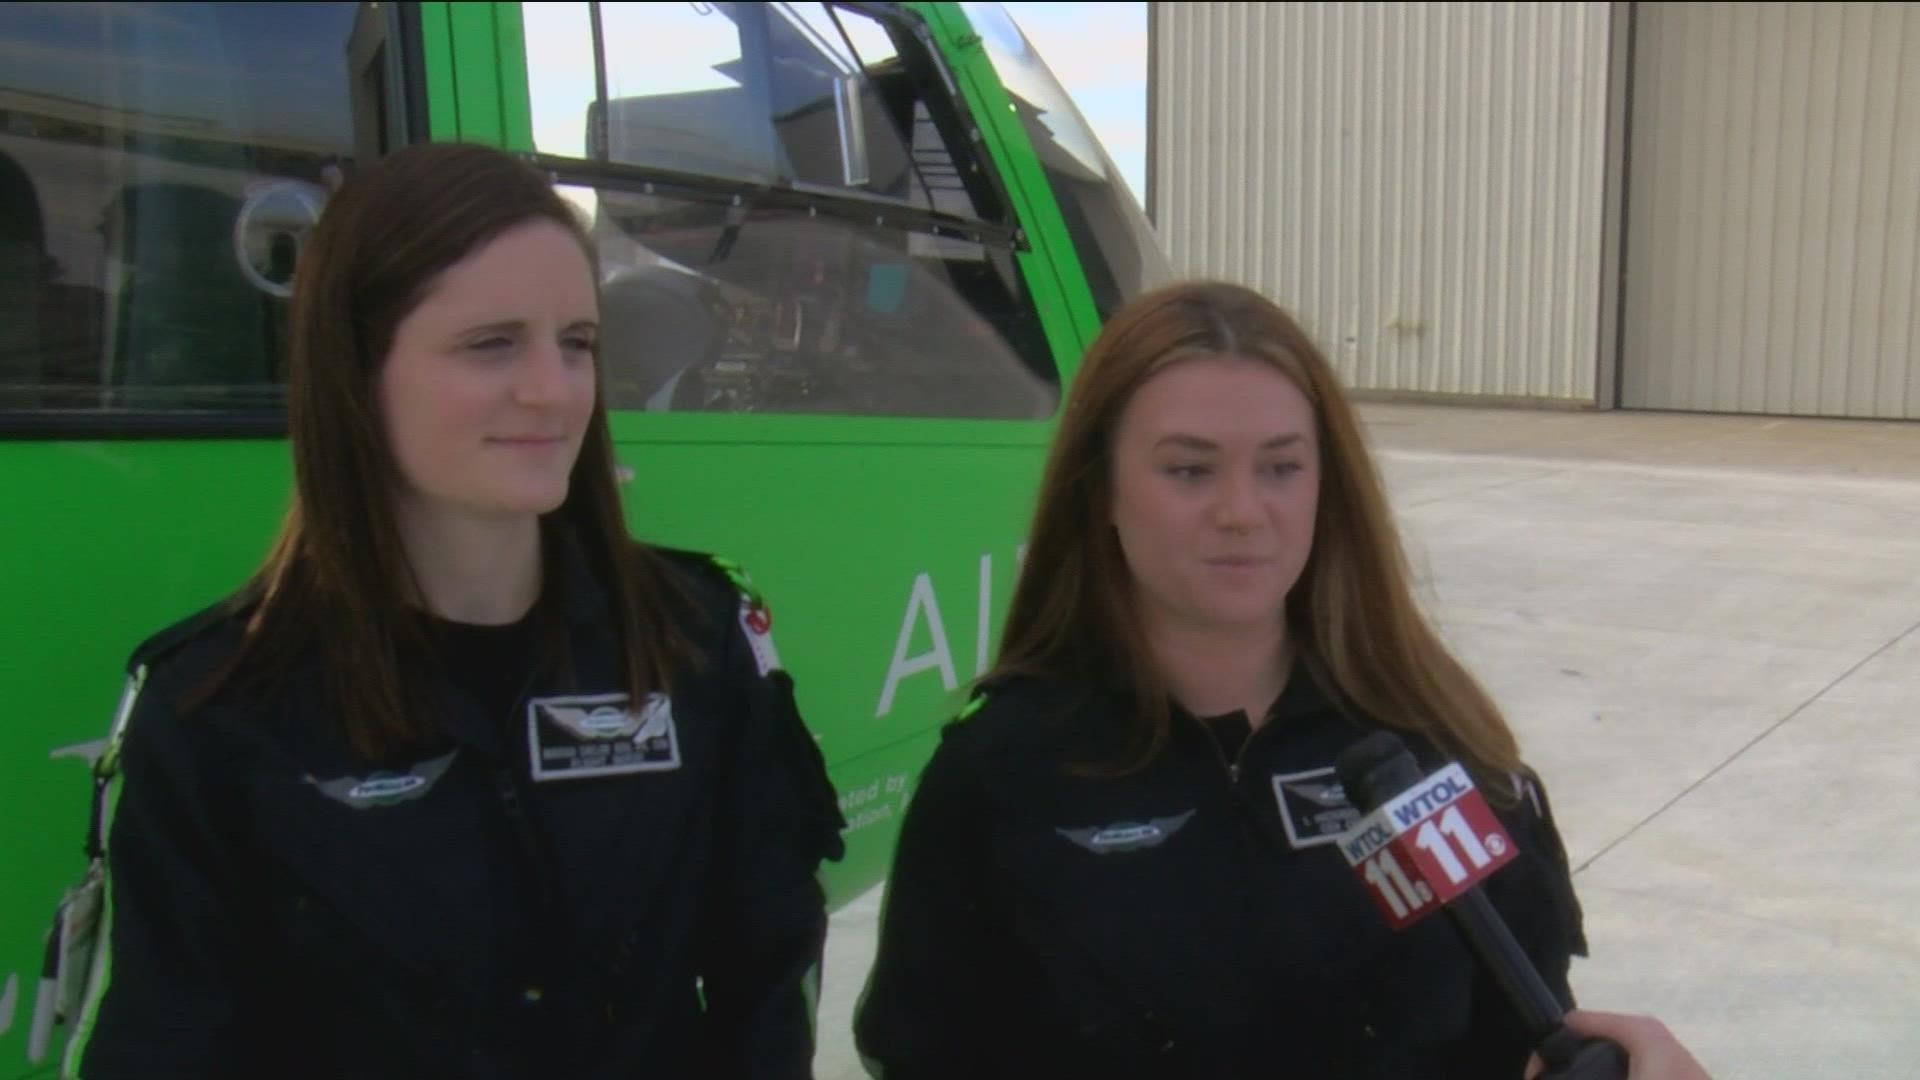 Mariah Saylor and Lindsay Hickman are among fewer than 200 people in the world certified as flight medics.